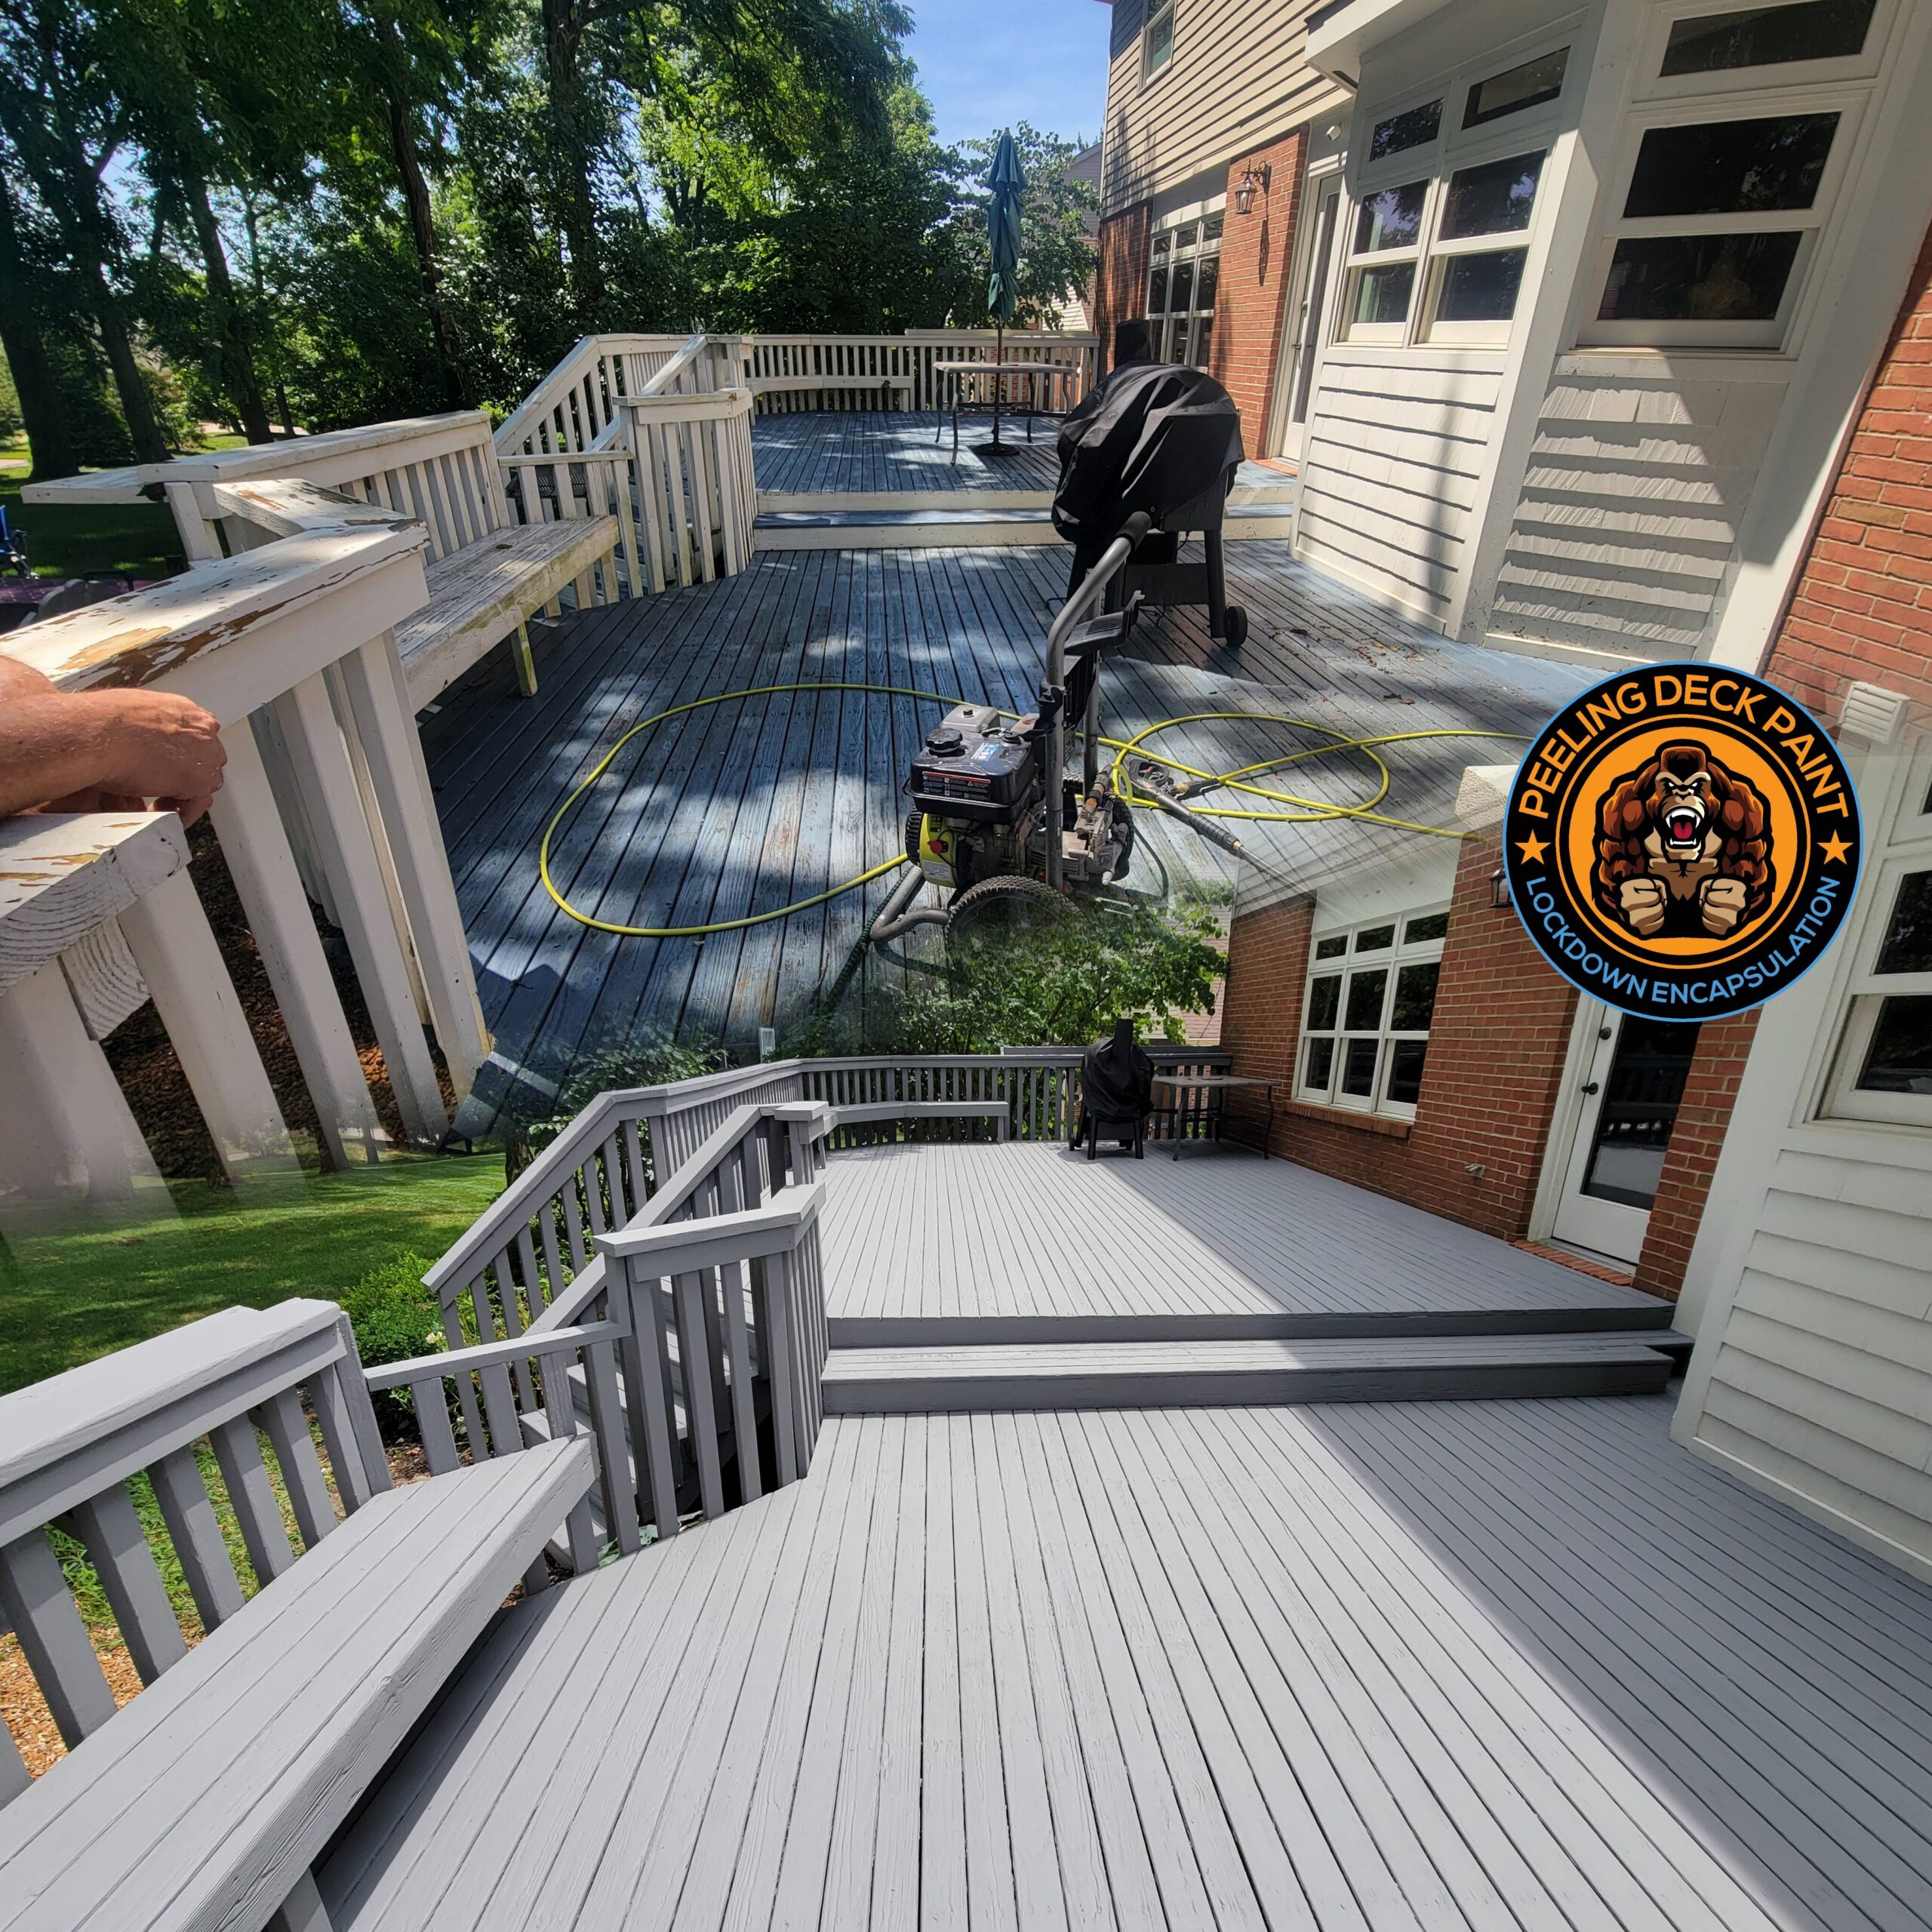 before and after image of a backyard deck in Union Kentucky. Before it had peeling deck paint and was ugly. After it is supremely protected and drop dead gorgeous thanks to the worlds toughest deck armor - Kong Armor™ and its deck rescue painters who performed peeling deck paint lockdown encapsulation on the structure